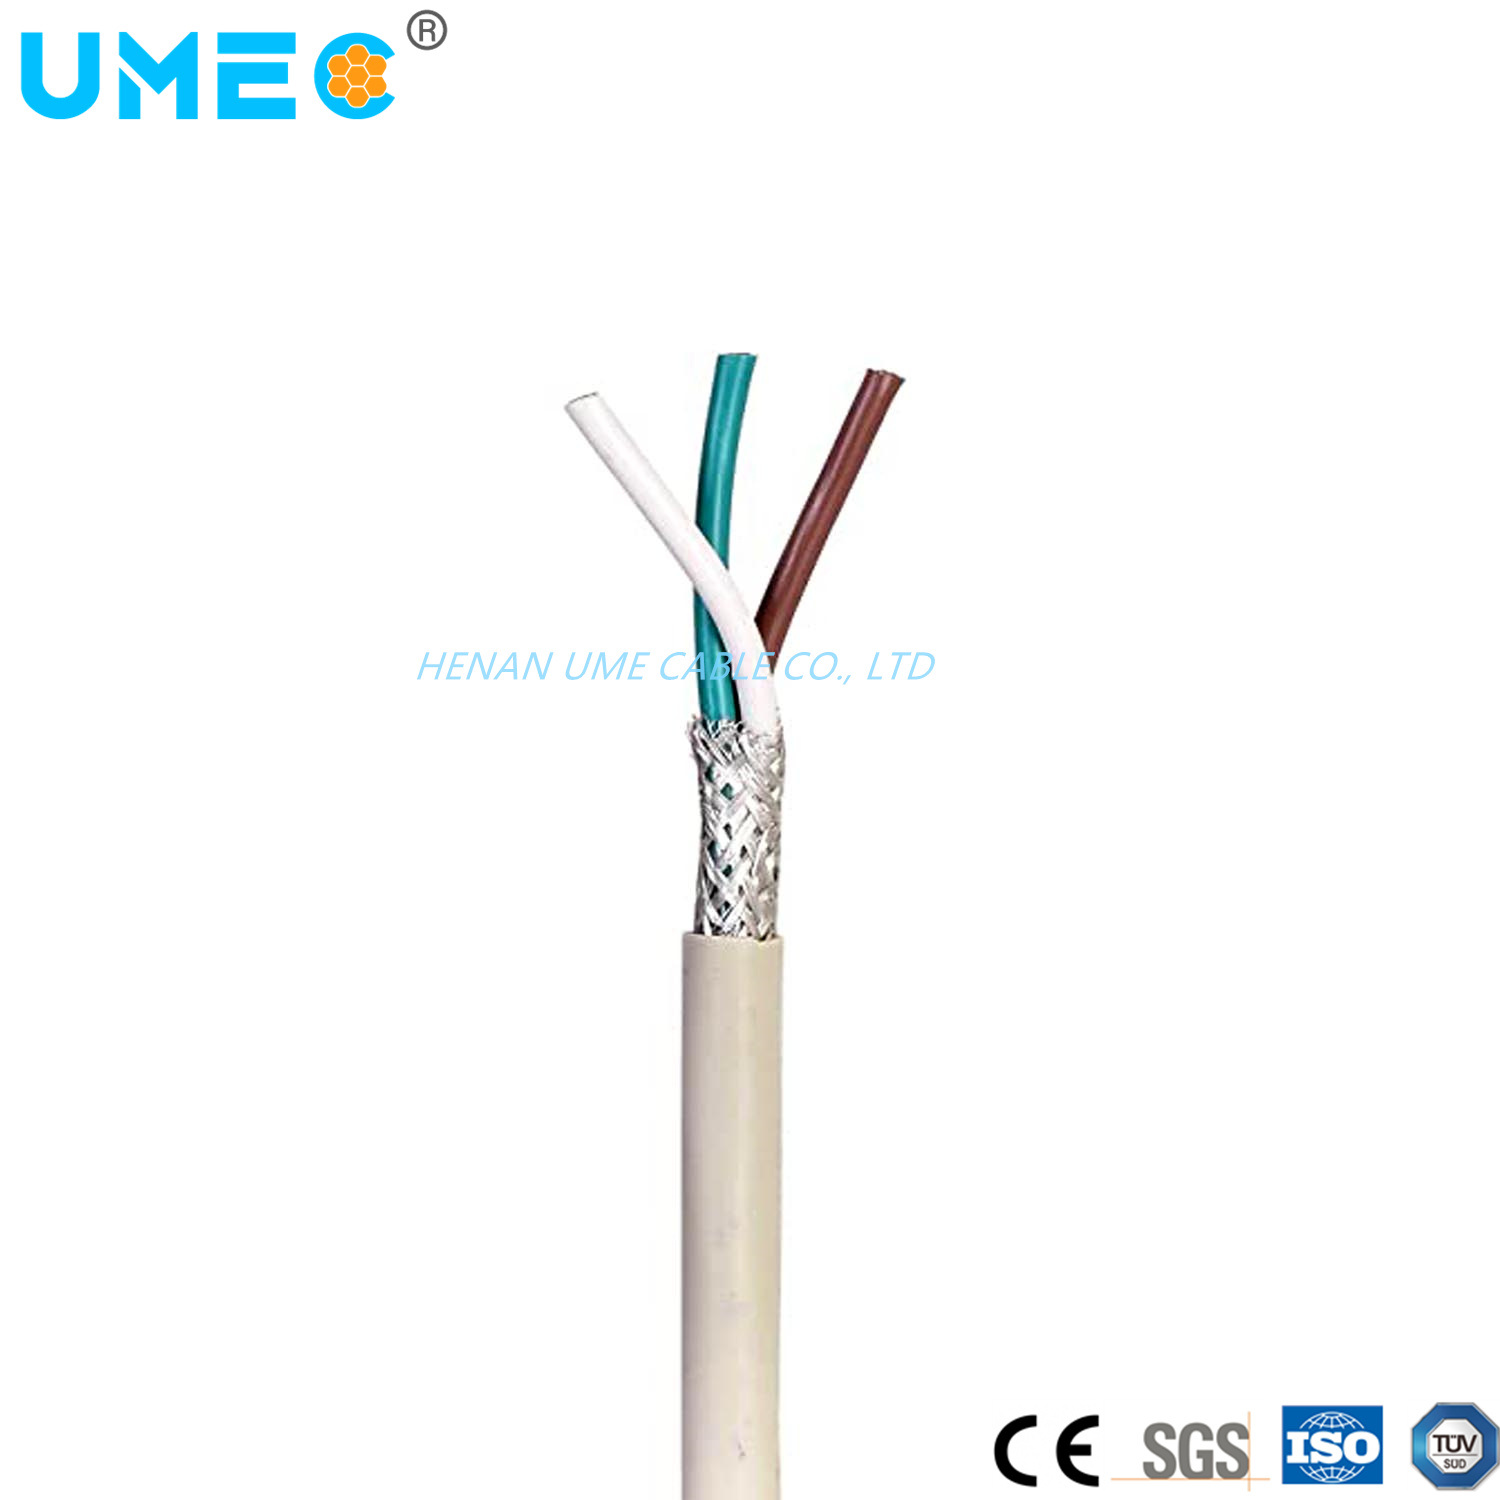 Liycy Liyy Ysly-Jb/Jz /Oz PVC Insulated and Sheathed with Copper Conductor Control Cable for Laying Indoors and in Trenches